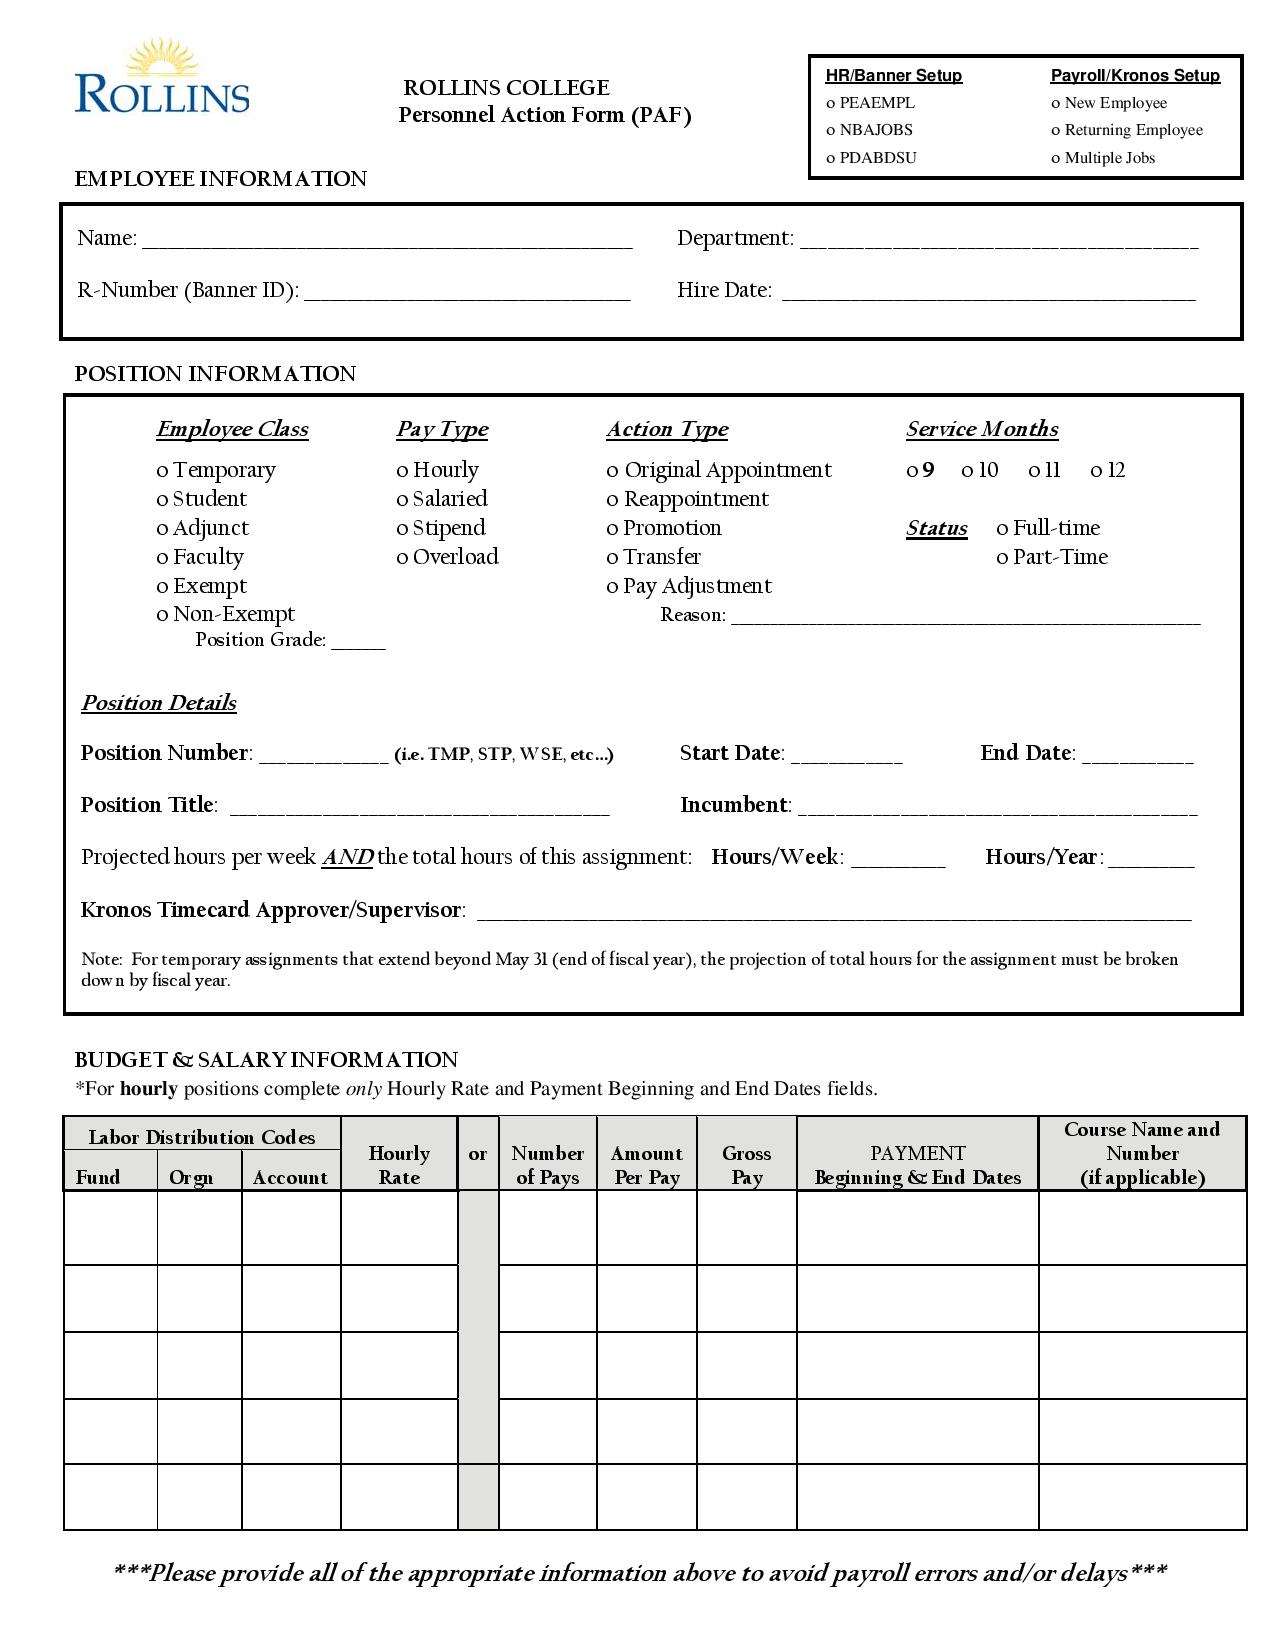 employee personnel action form paf page 001